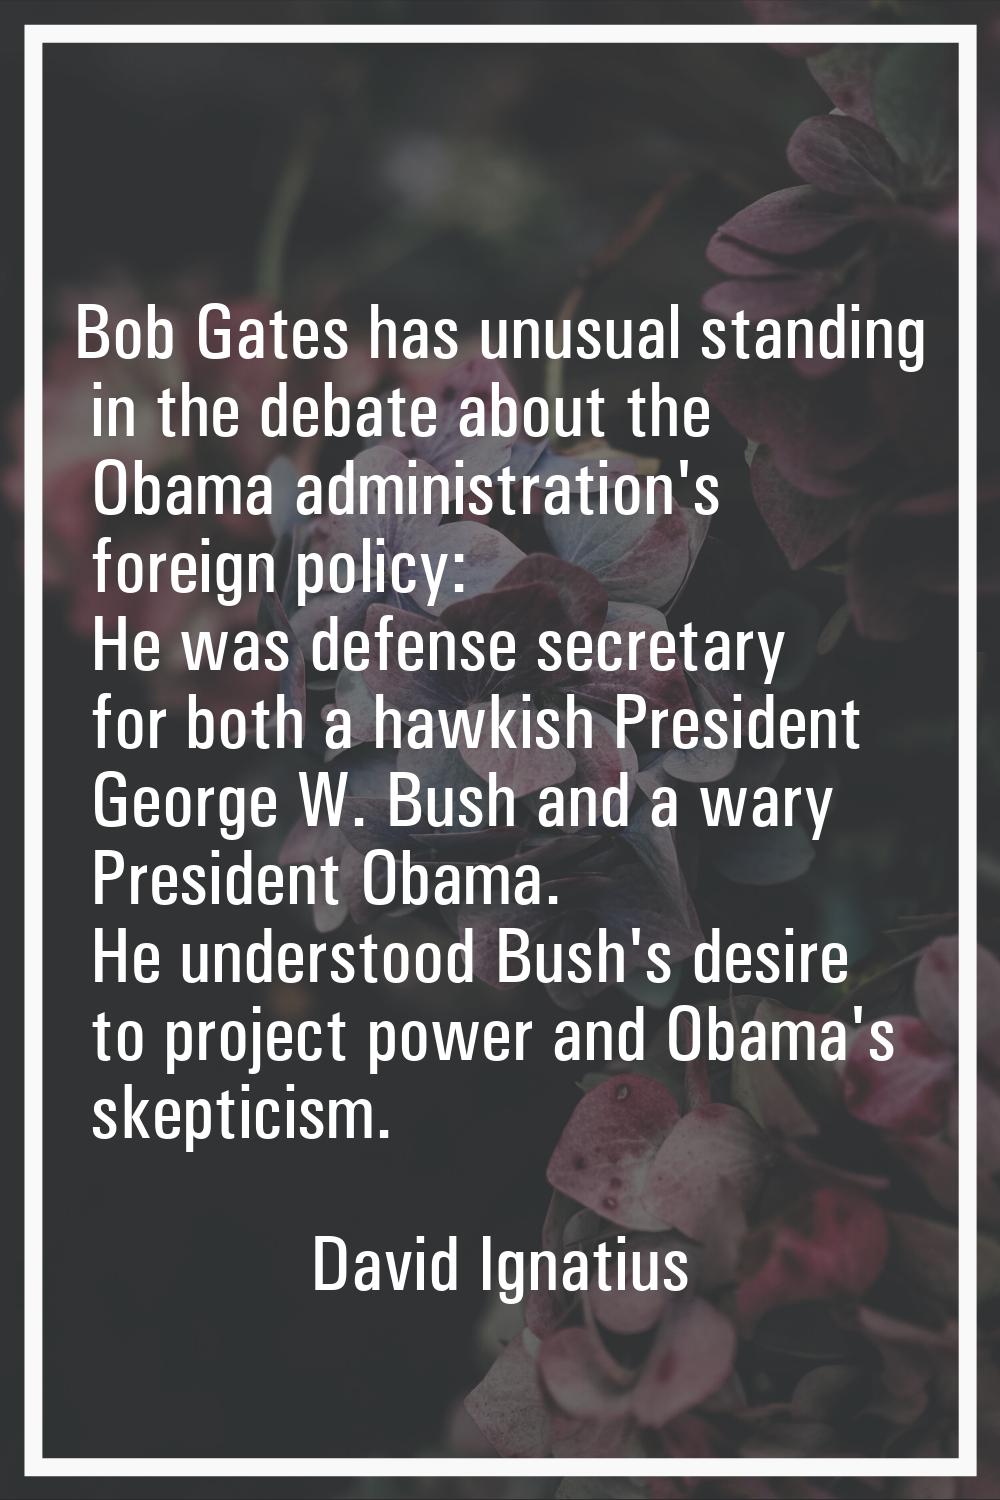 Bob Gates has unusual standing in the debate about the Obama administration's foreign policy: He wa